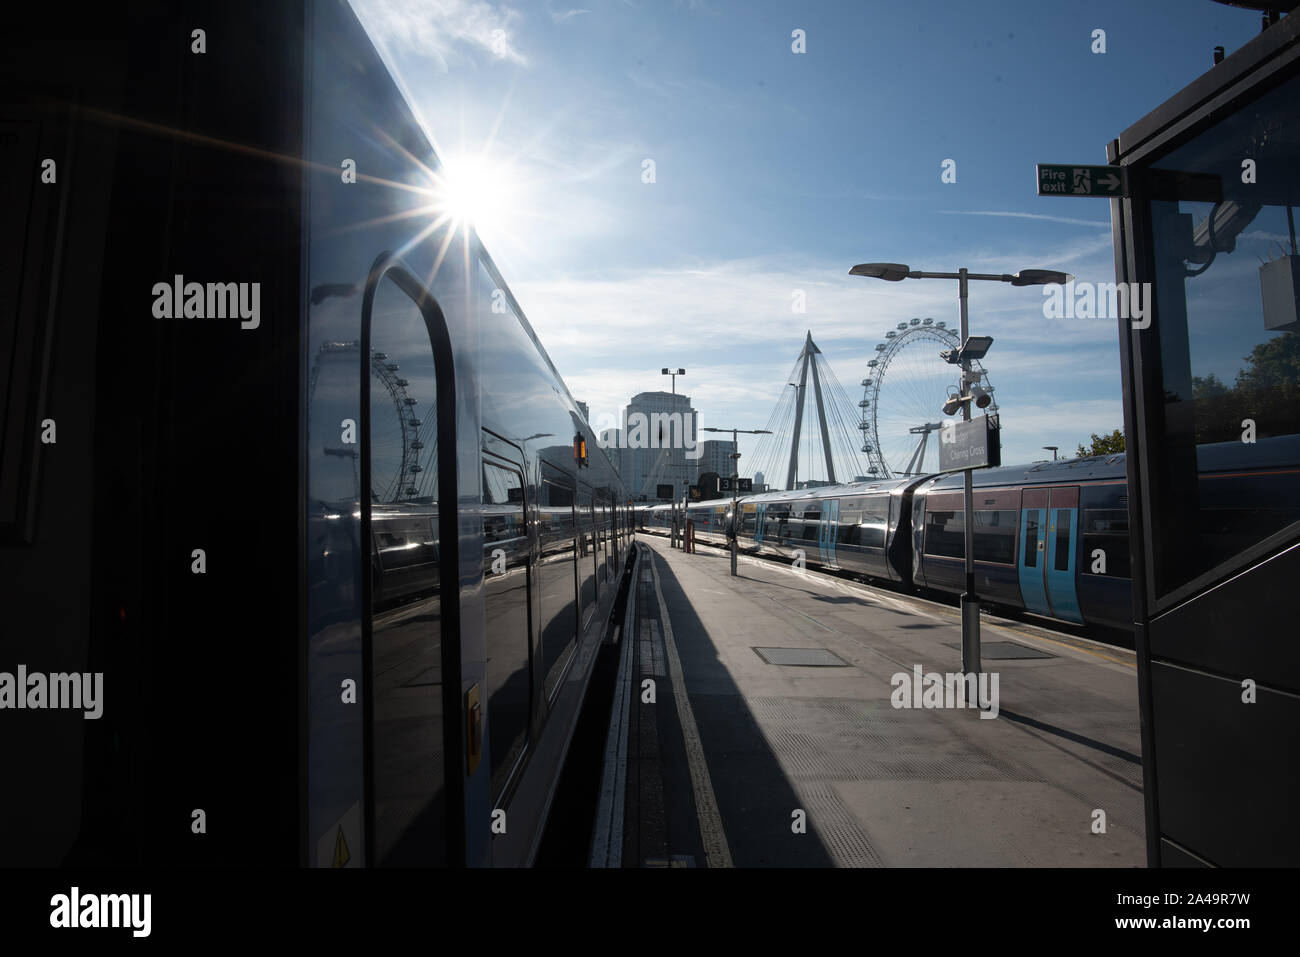 London, United Kingdom - September 15, 2019: A view of London trains and the Eye Ferry Wheel from Charing Cross Station in the mid-morning. Stock Photo